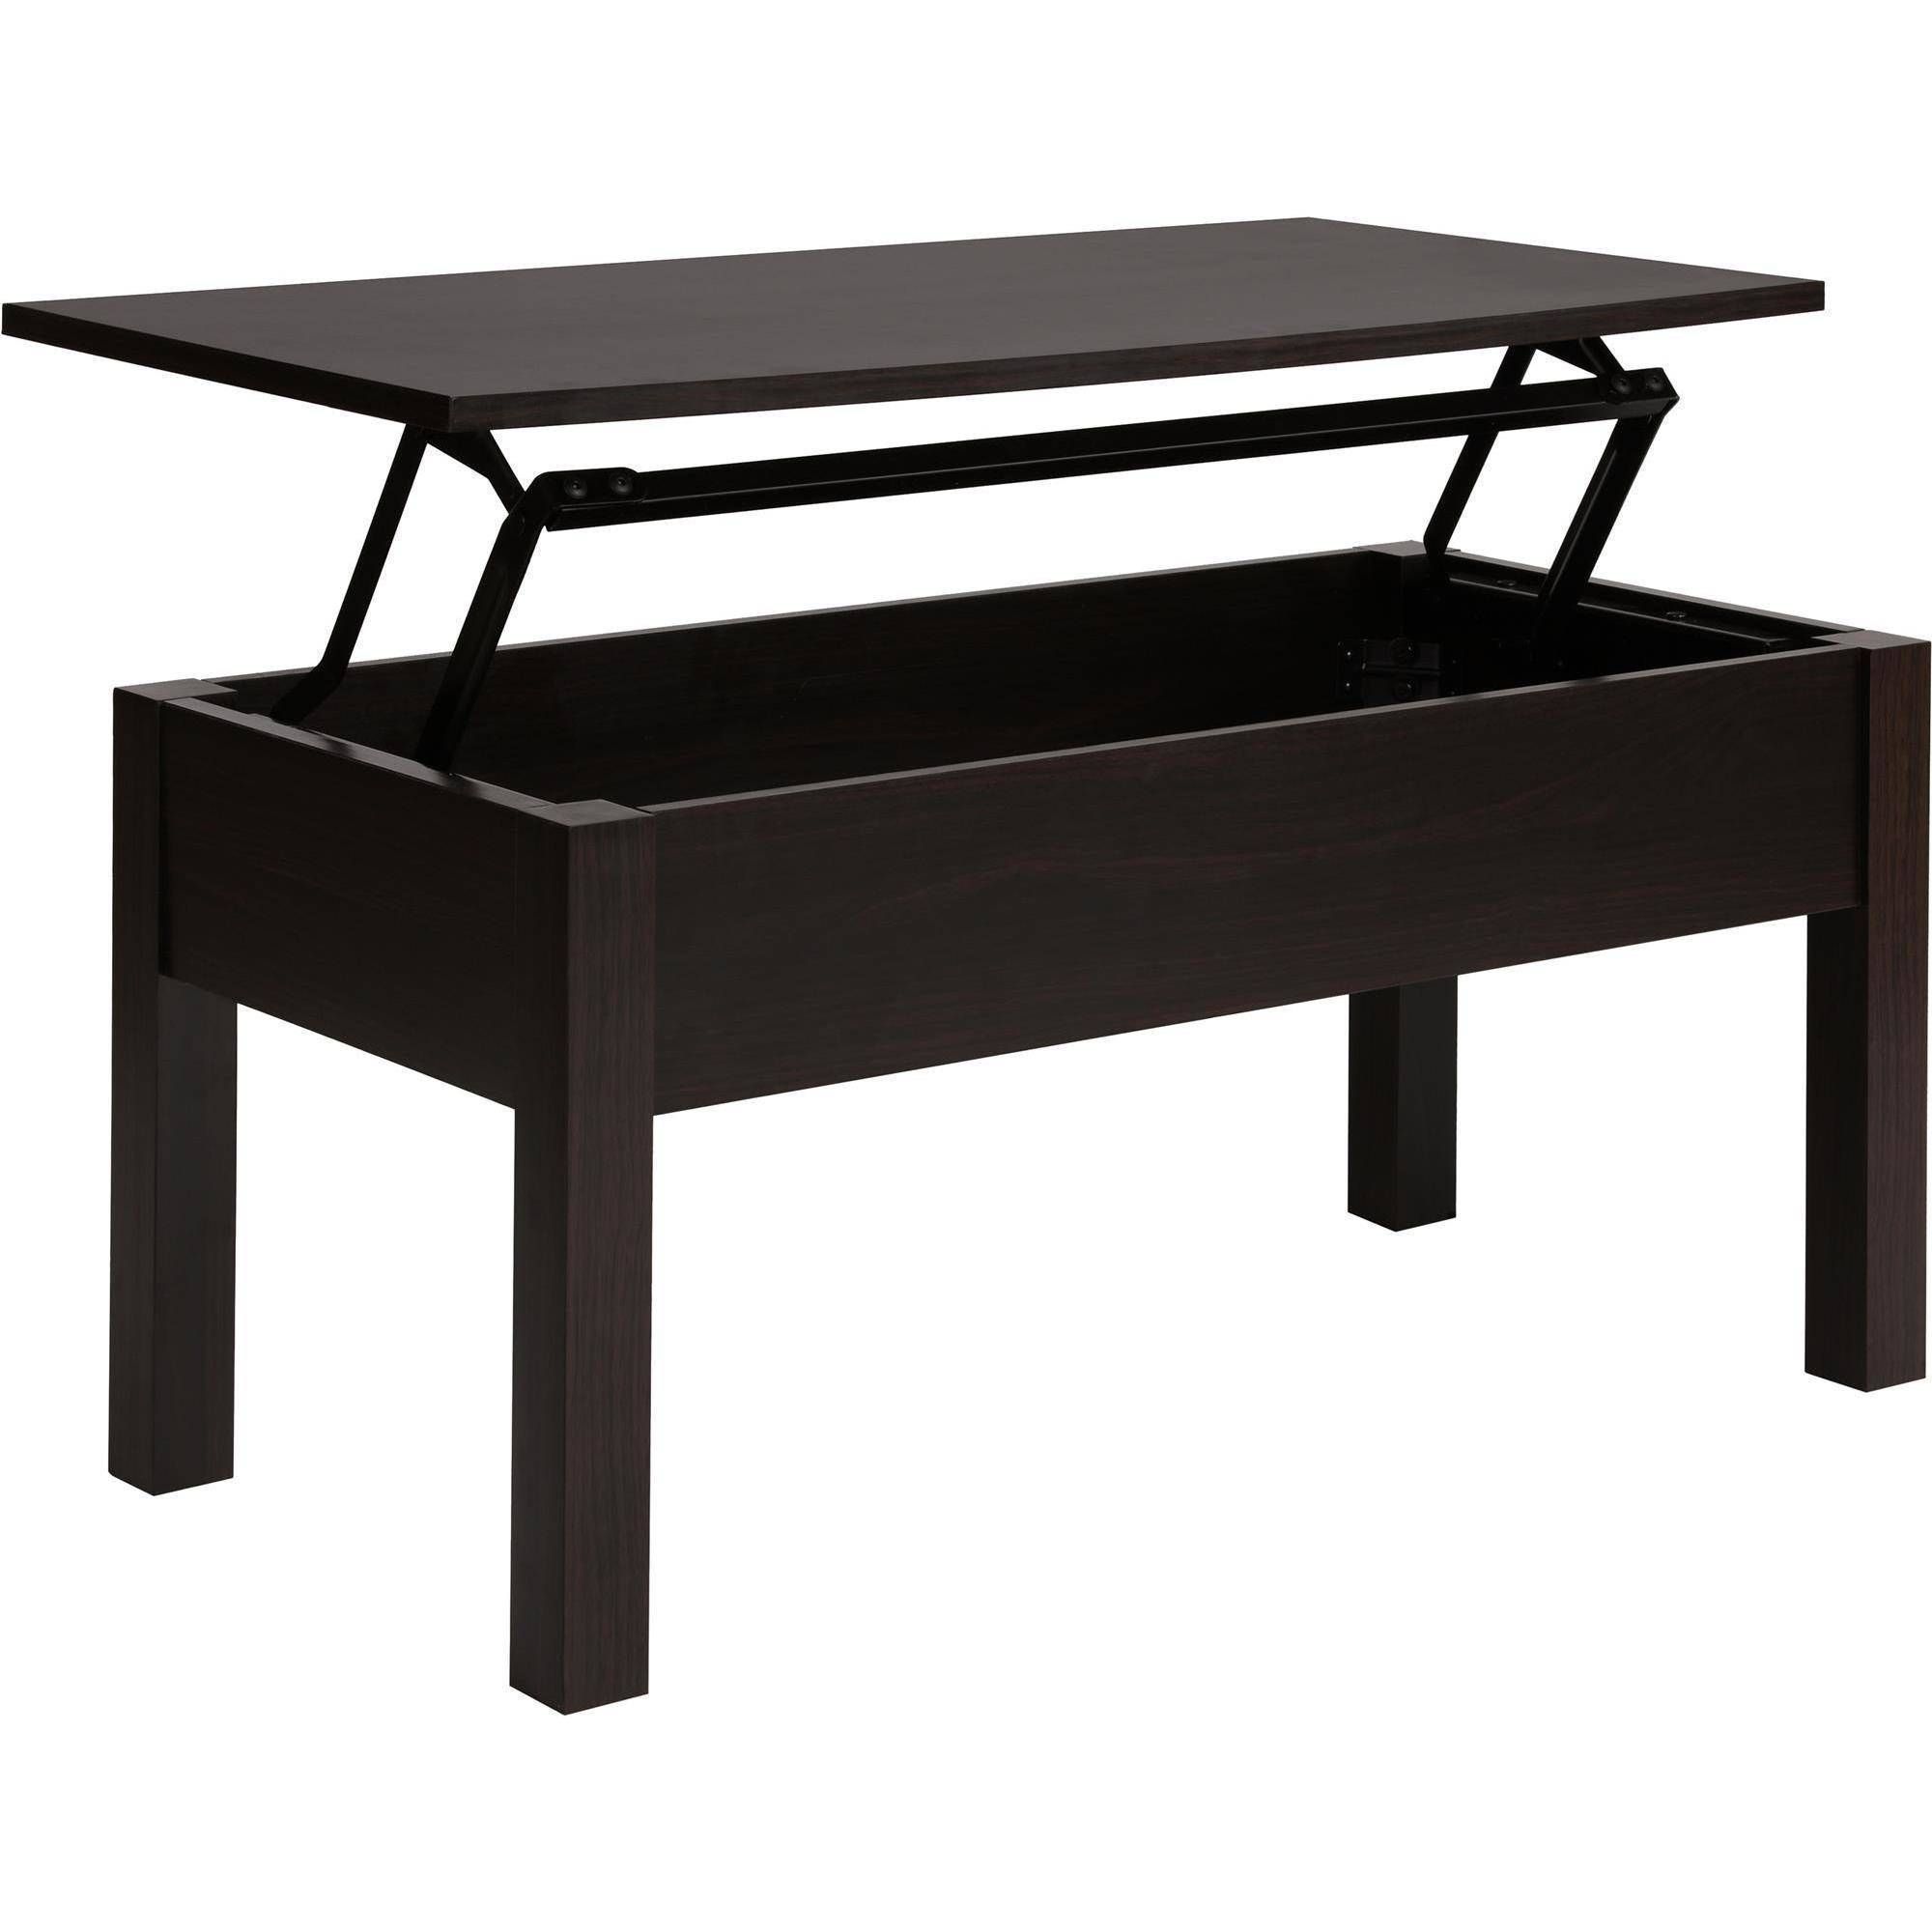 Mainstays Lift Top Coffee Table, Multiple Colors – Walmart Regarding Raise Up Coffee Tables (View 18 of 30)